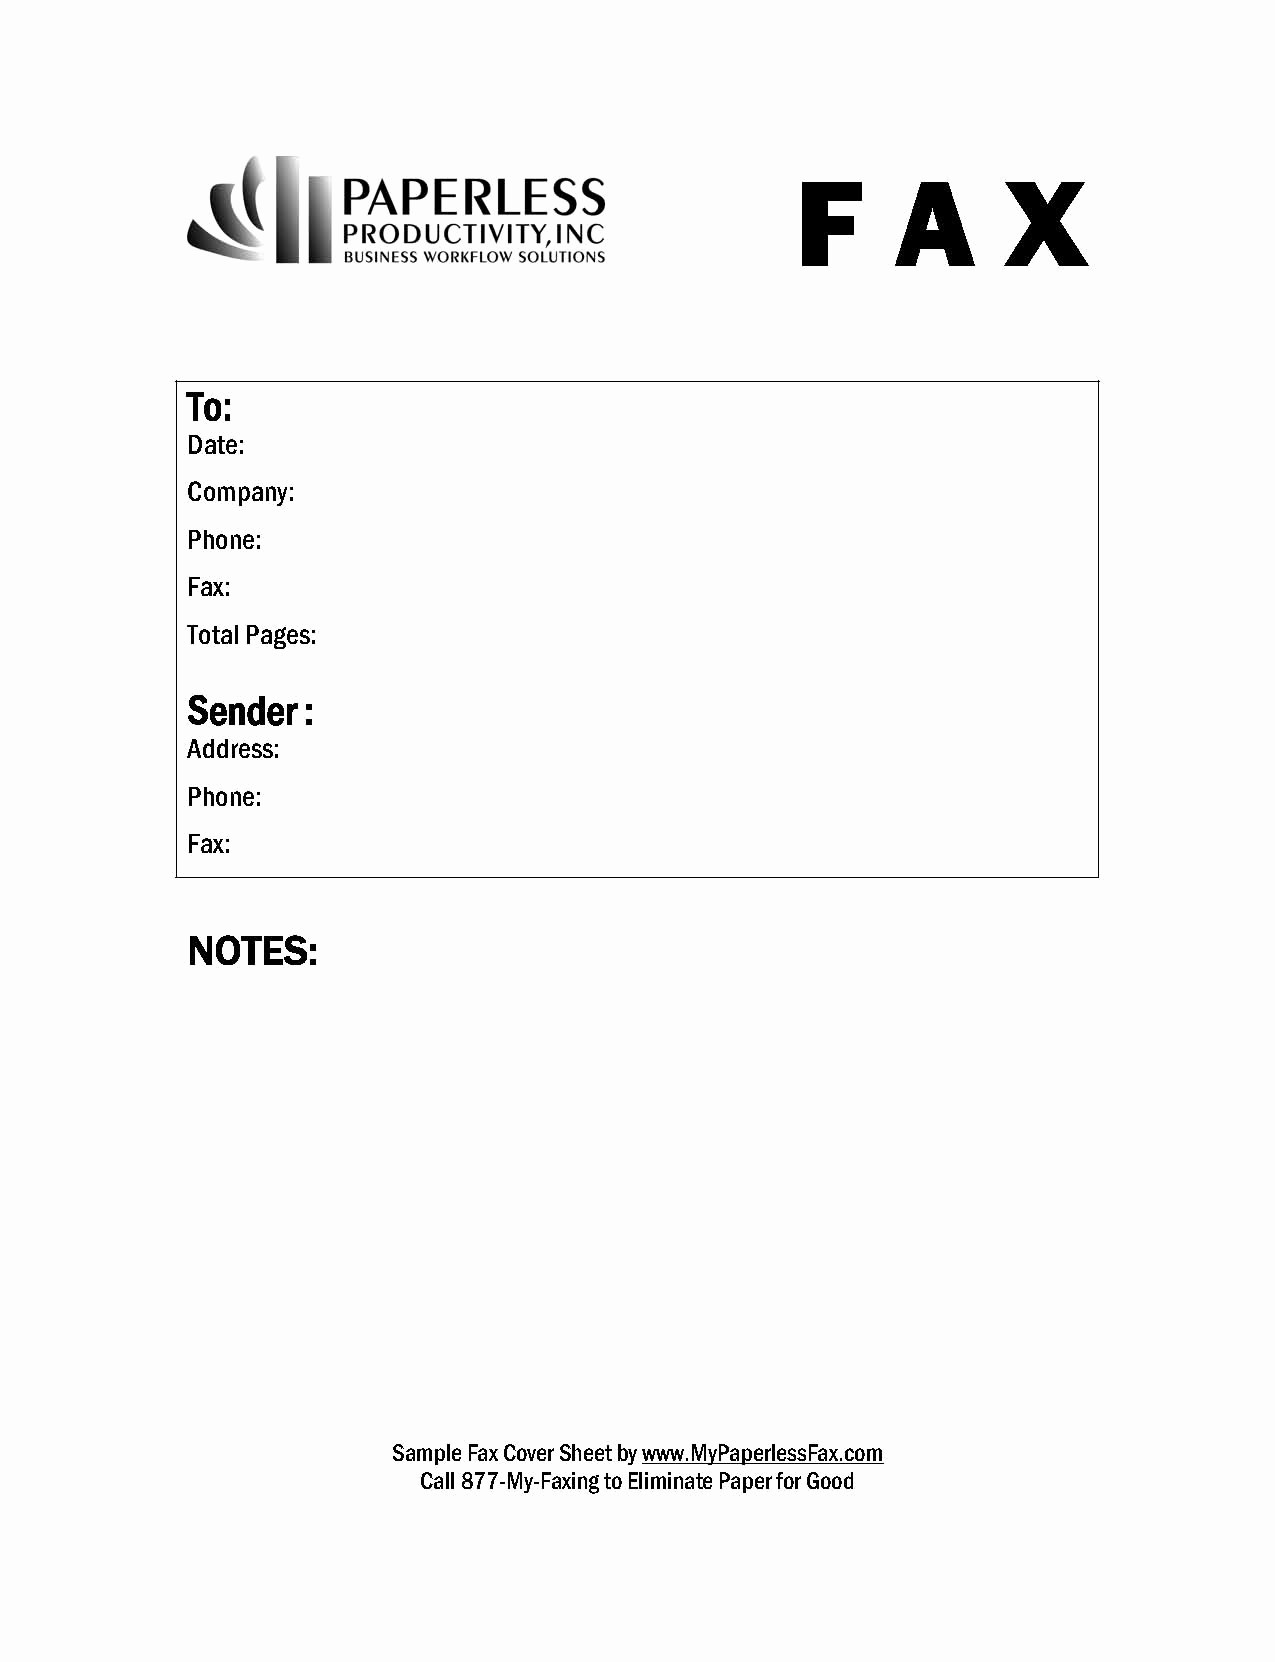 Free Fax Cover Sheet Templates Beautiful Blank Fax Cover Letter 2016 Samplebusinessresume